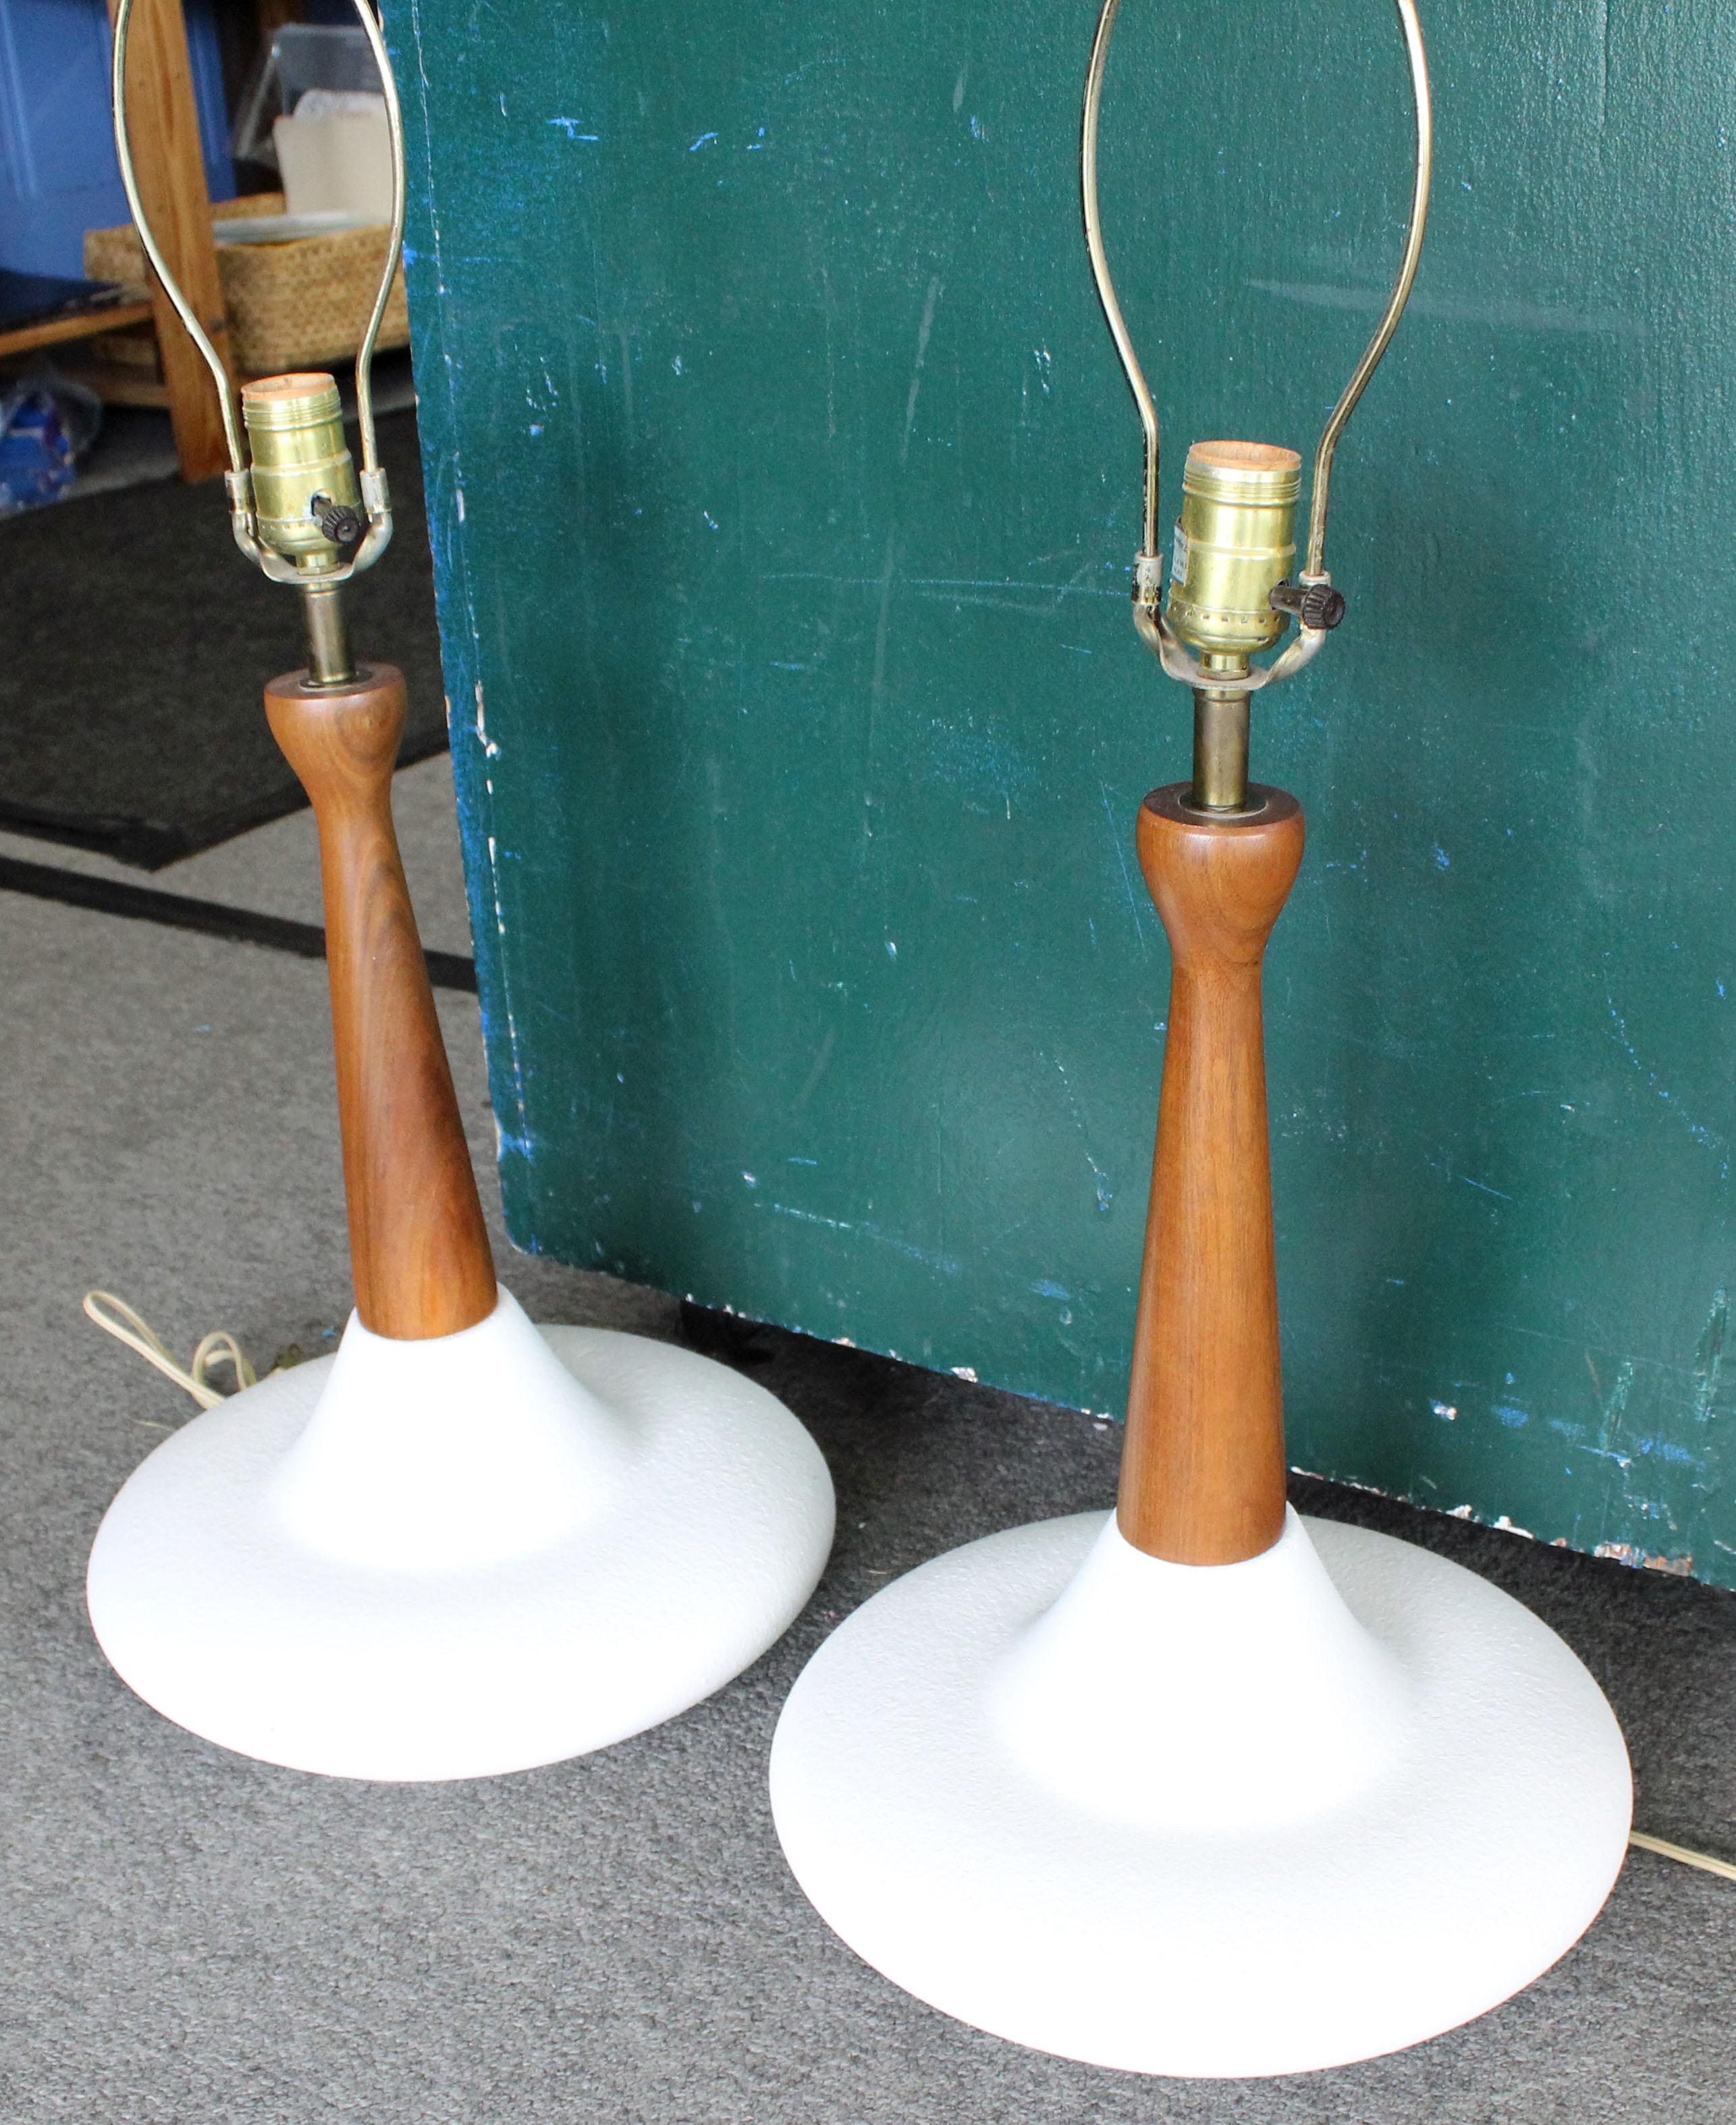 Offered is a retro pair of Mid-Century Modern table lamps, made with walnut and a white textured pottery bottom. They are in excellent, working condition, showing normal wear. They are not signed. Really cool lighting for any room.